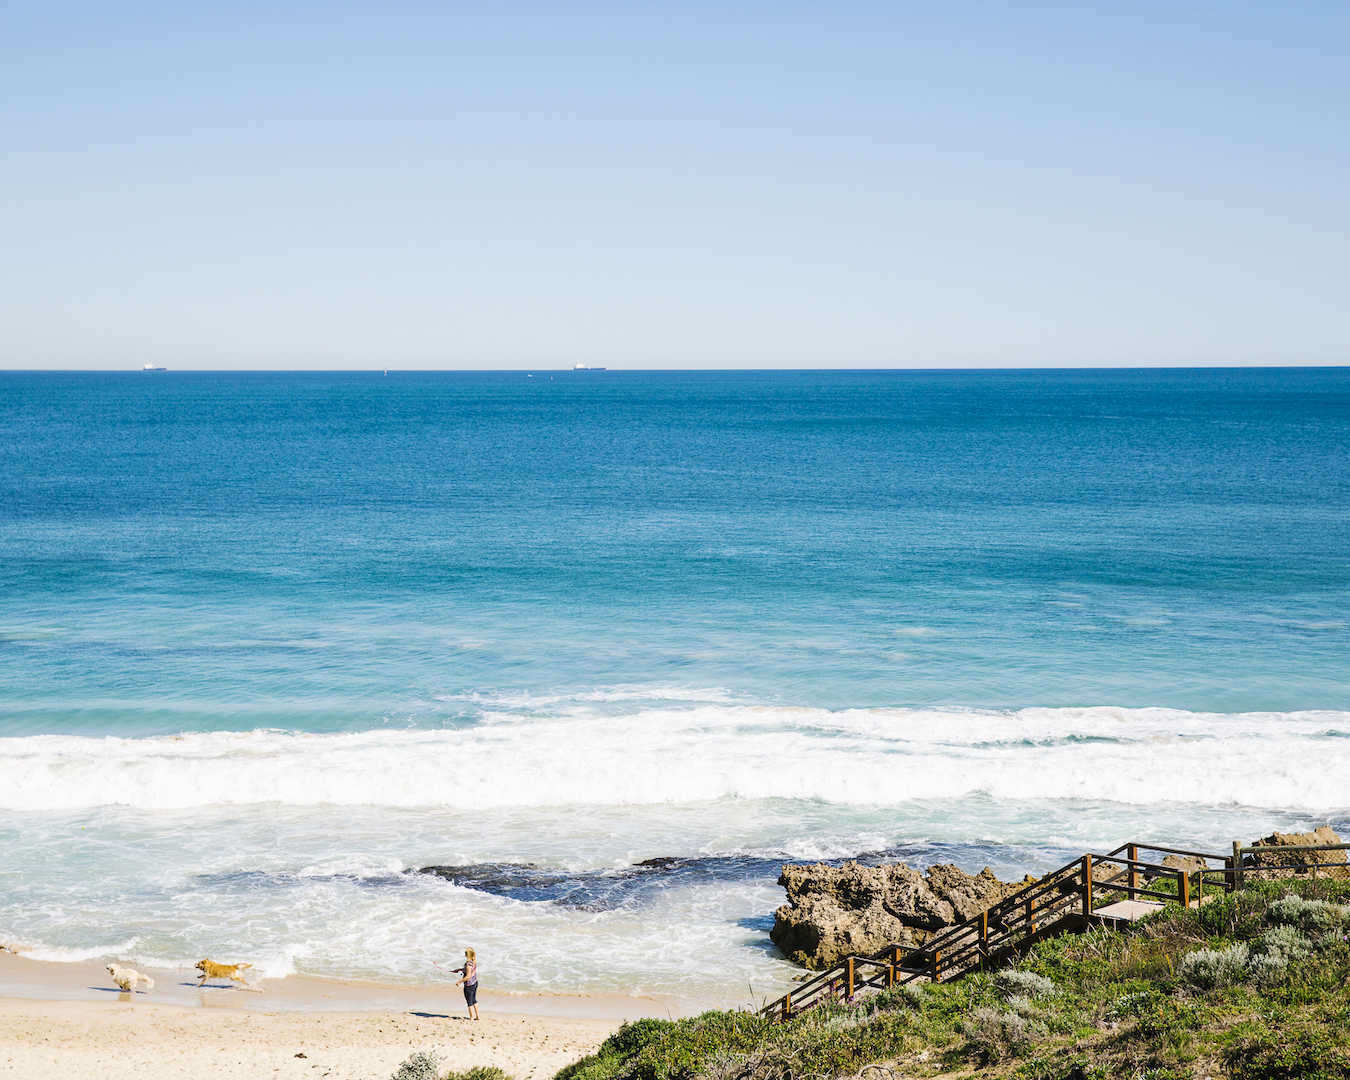 Trigg Beach, one of the best beaches in Perth